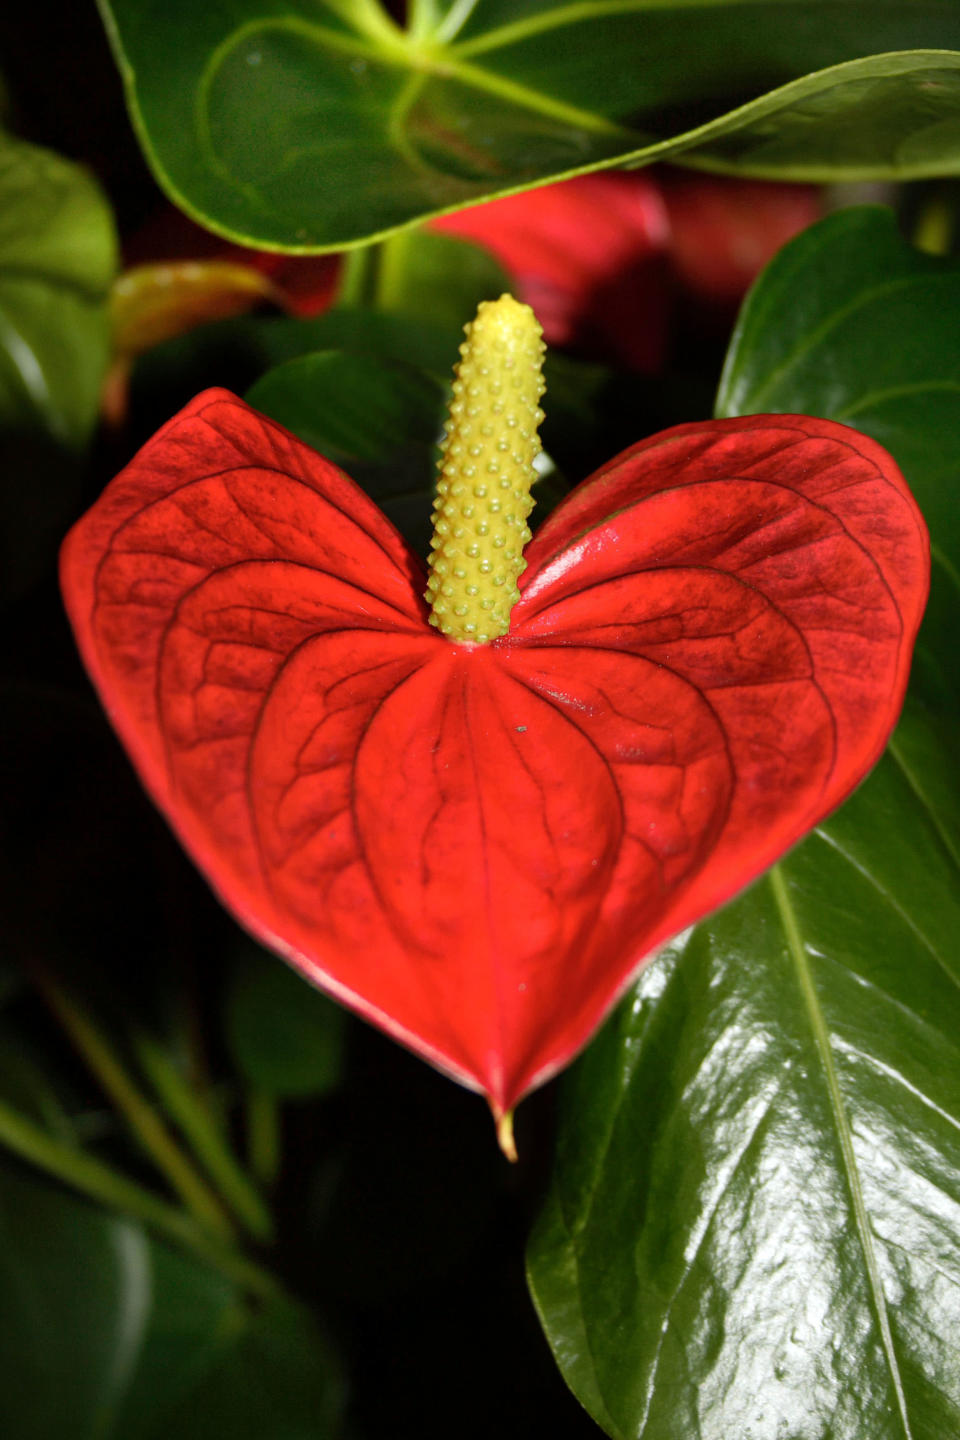 A heart-shaped Red Anthurium. These extraordinary images, taken by photographers across the globe, show Mother Nature is also celebrating the big day with iconic heart shapes appearing all over the natural world. (PIC FROM ERIC DODDS/FOTOLIBTA/CATERS NEWS)